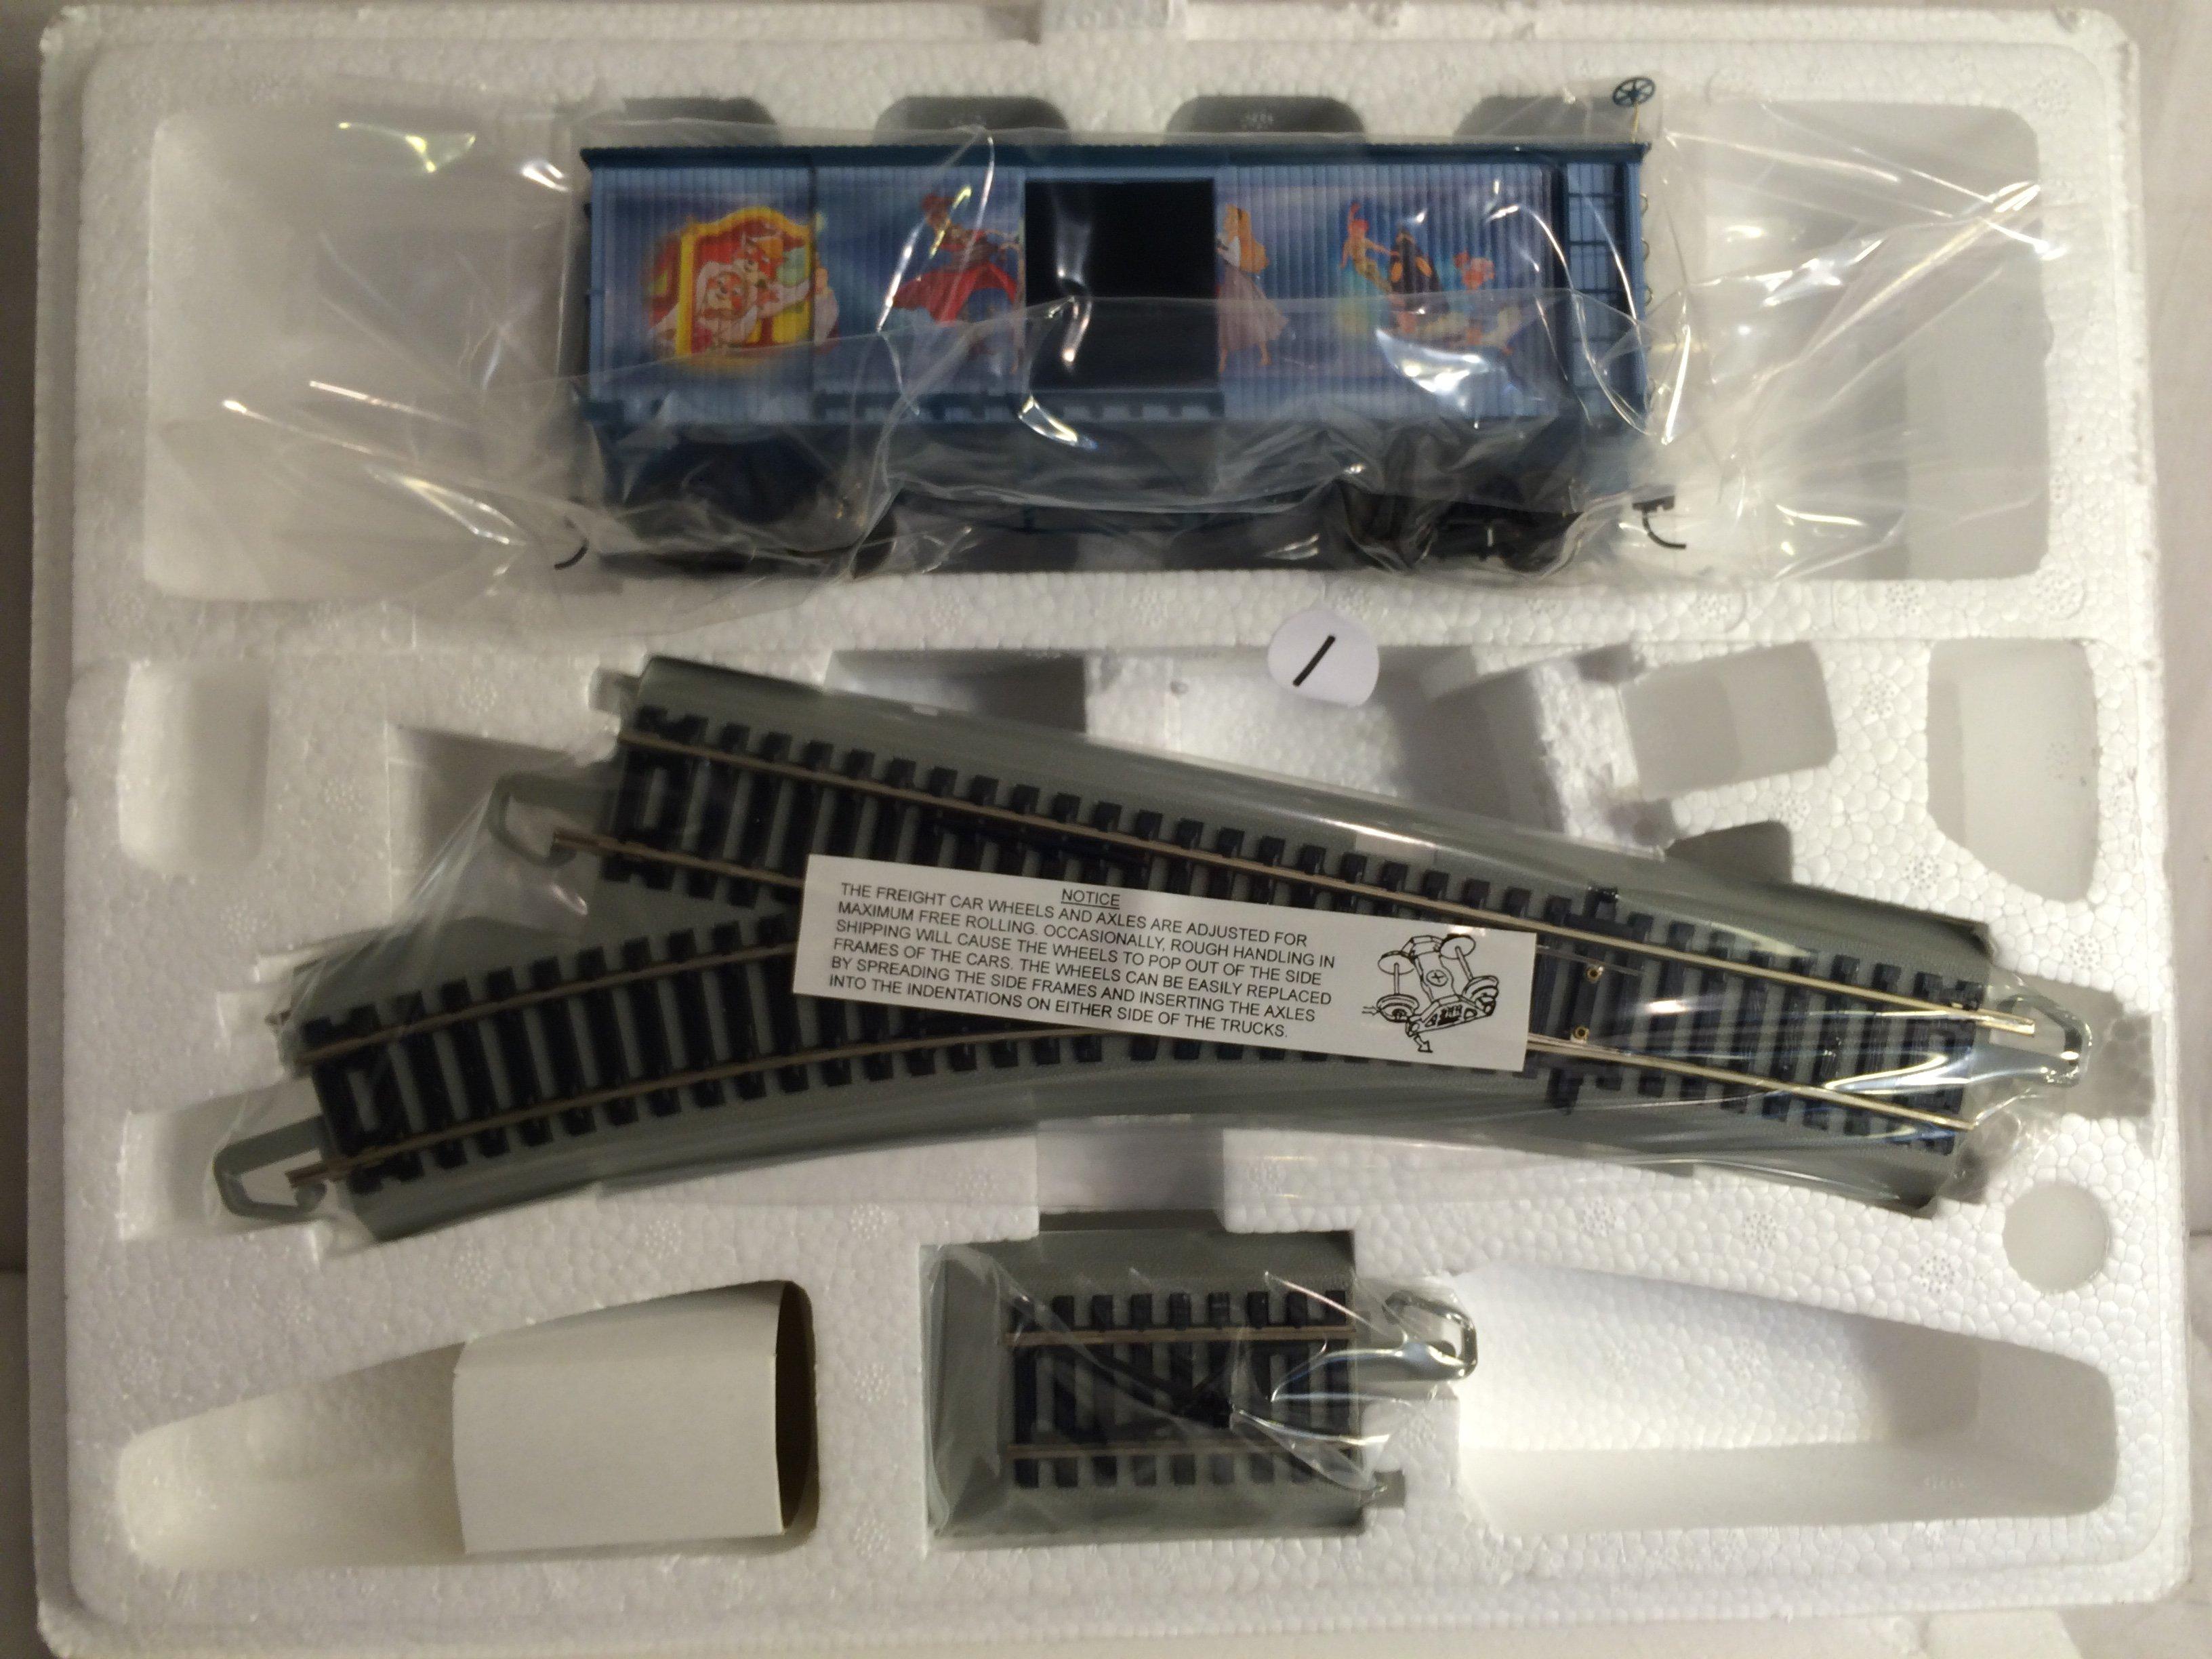 Collector New Hawthorne Village Train "Dumbo's Box Car" W/COA Size:14"by 11" By 4.1/2"Tall